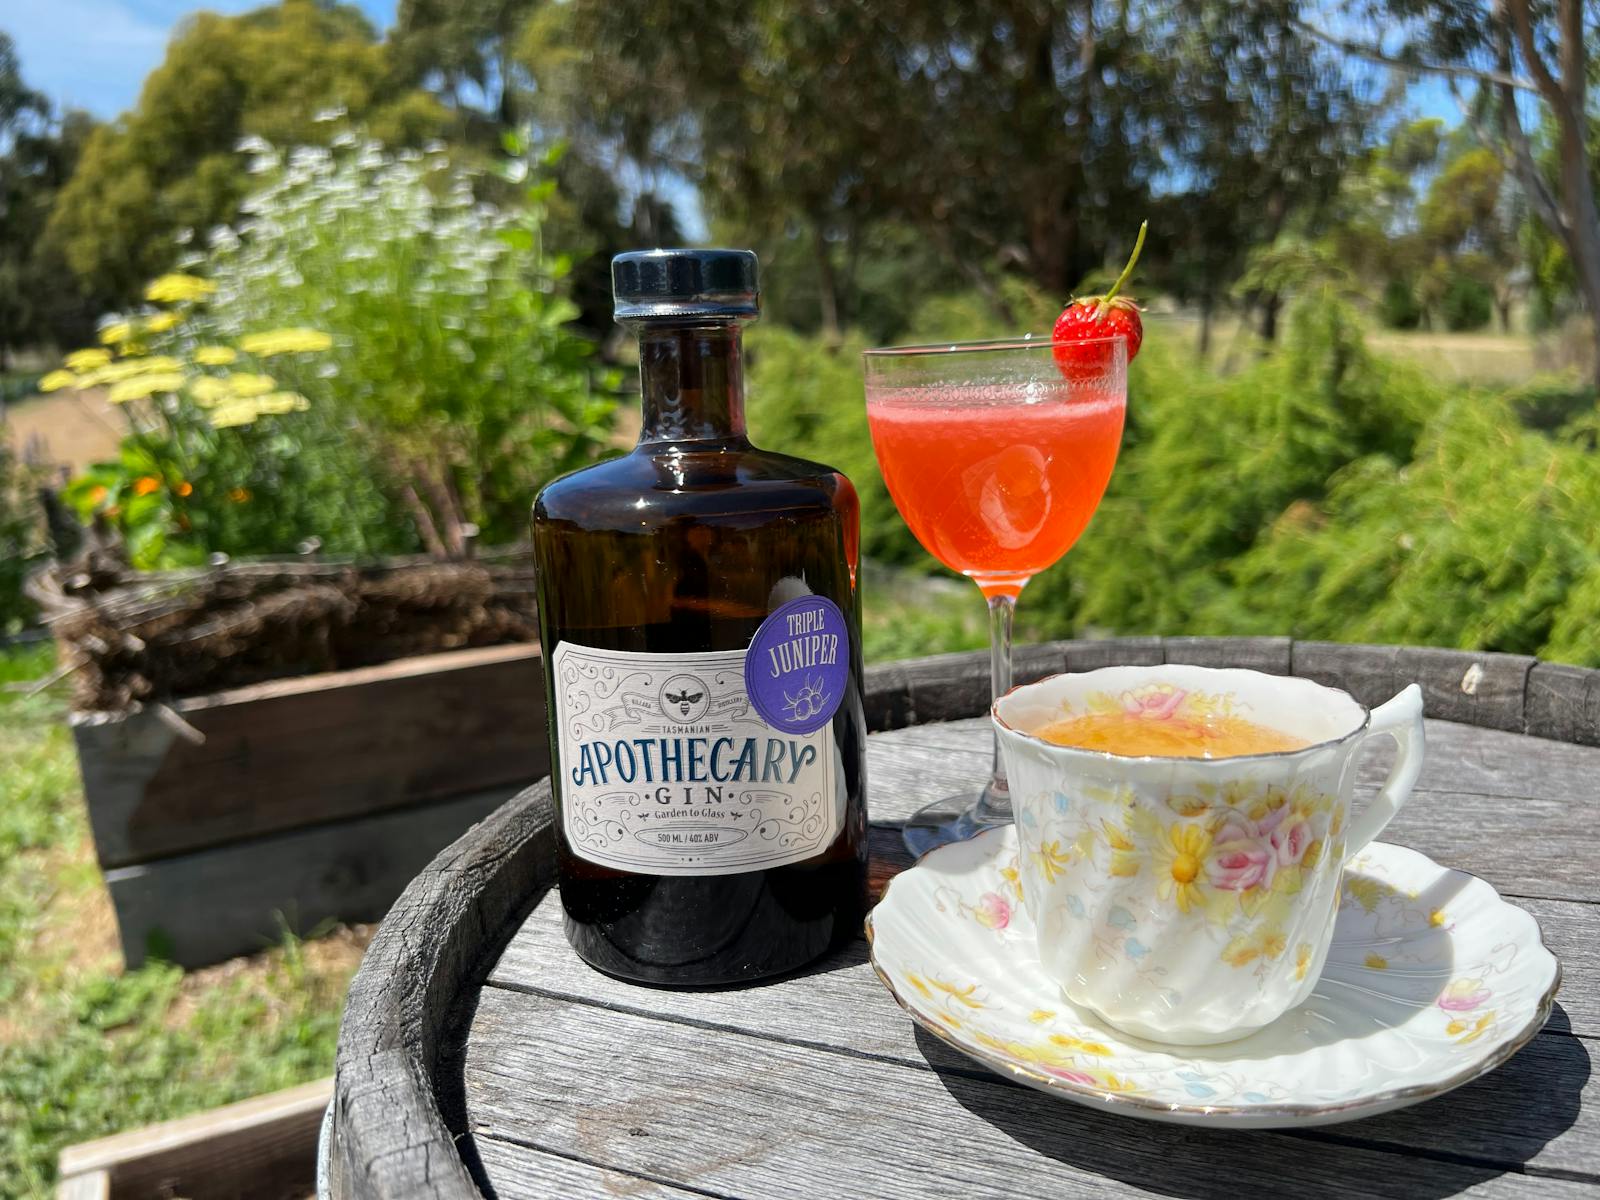 Gin bottle with cocktails in a glass and cup in a herb garden